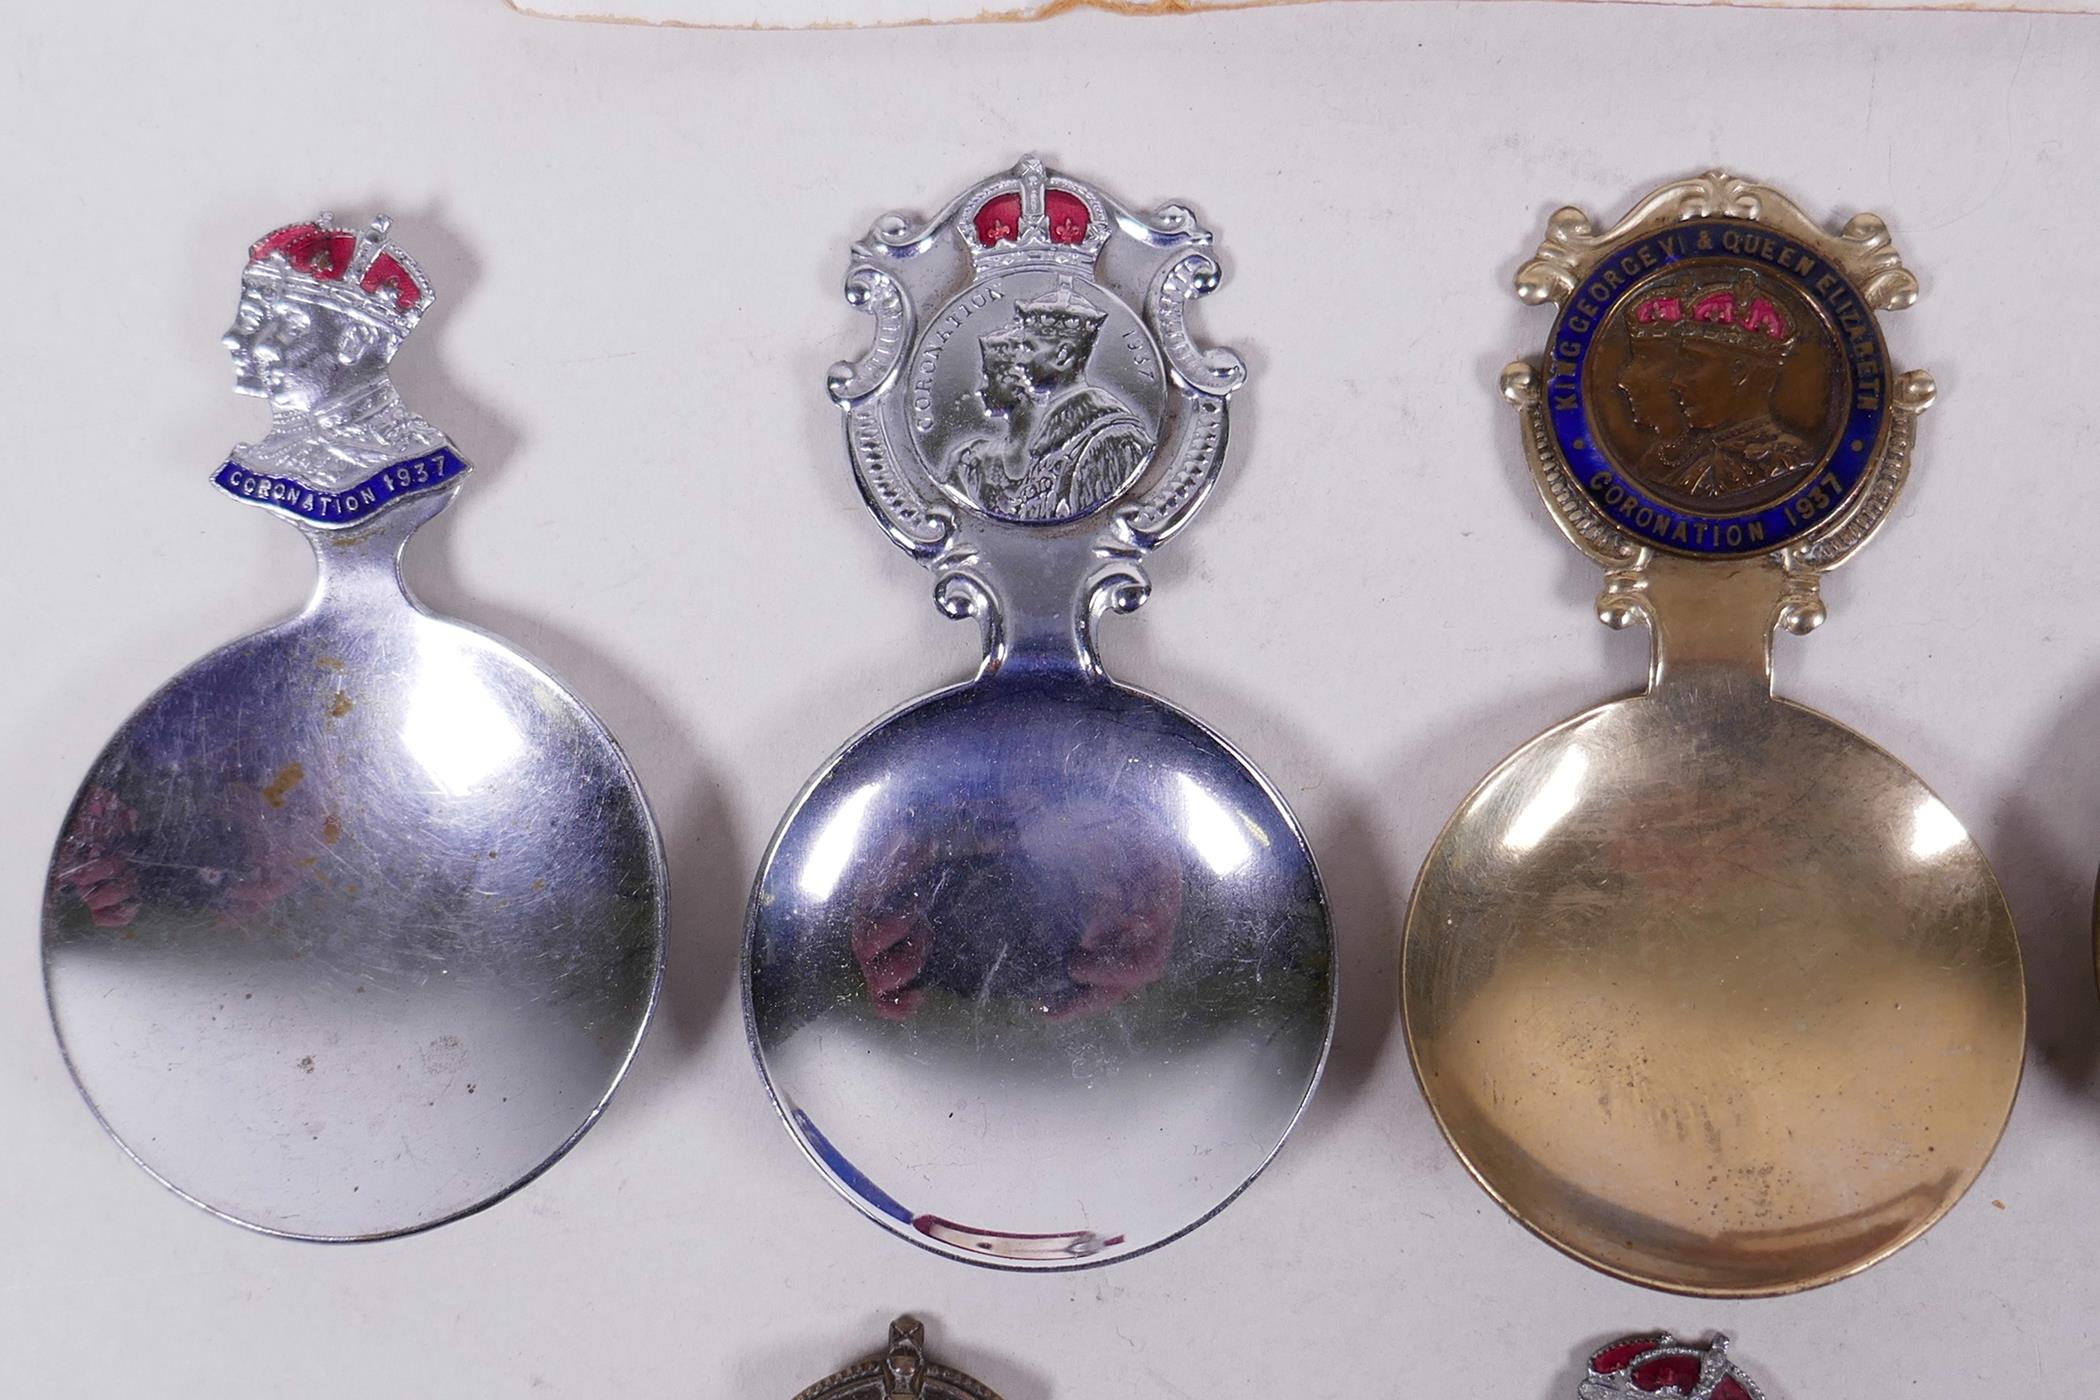 Eight commemorative 1937 coronation tea caddy spoons in silver plate, silver gilt or brass - Image 5 of 12